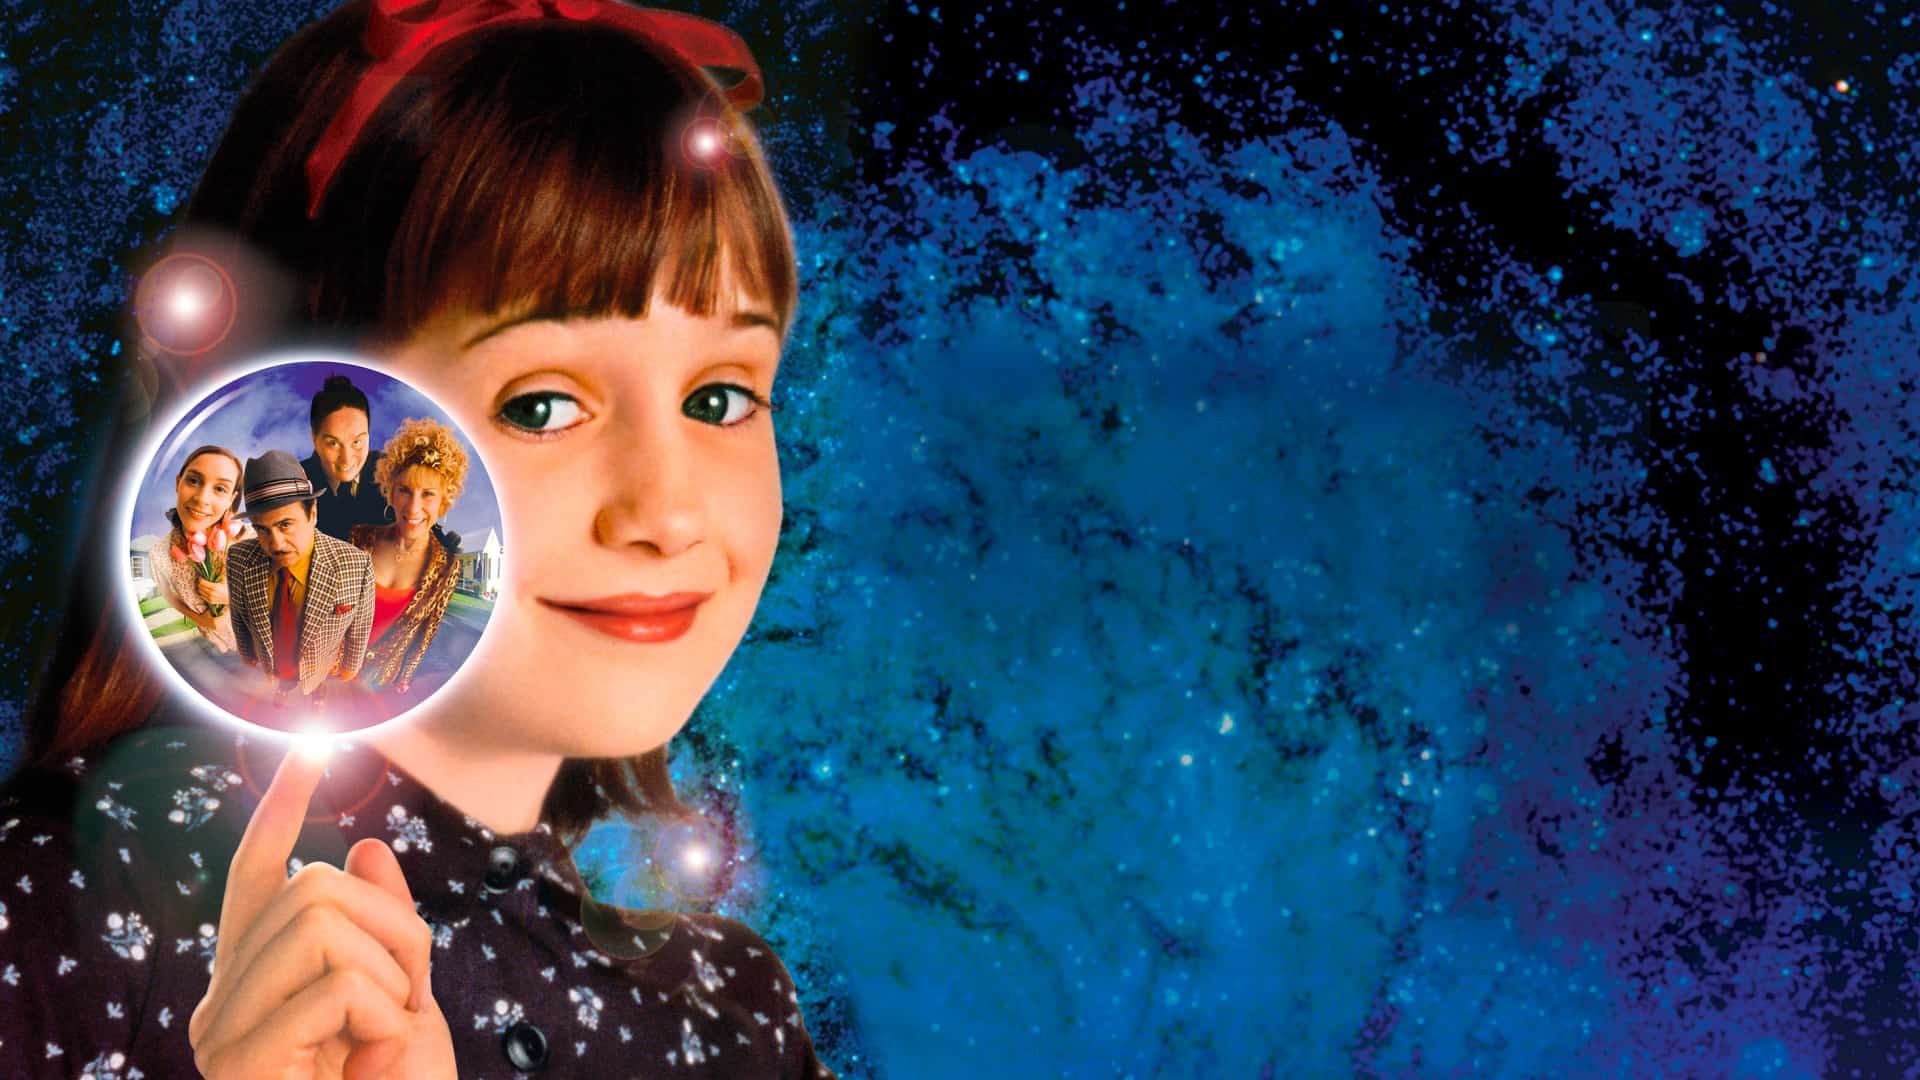 Top 7 Movie Child Actresses of All Time